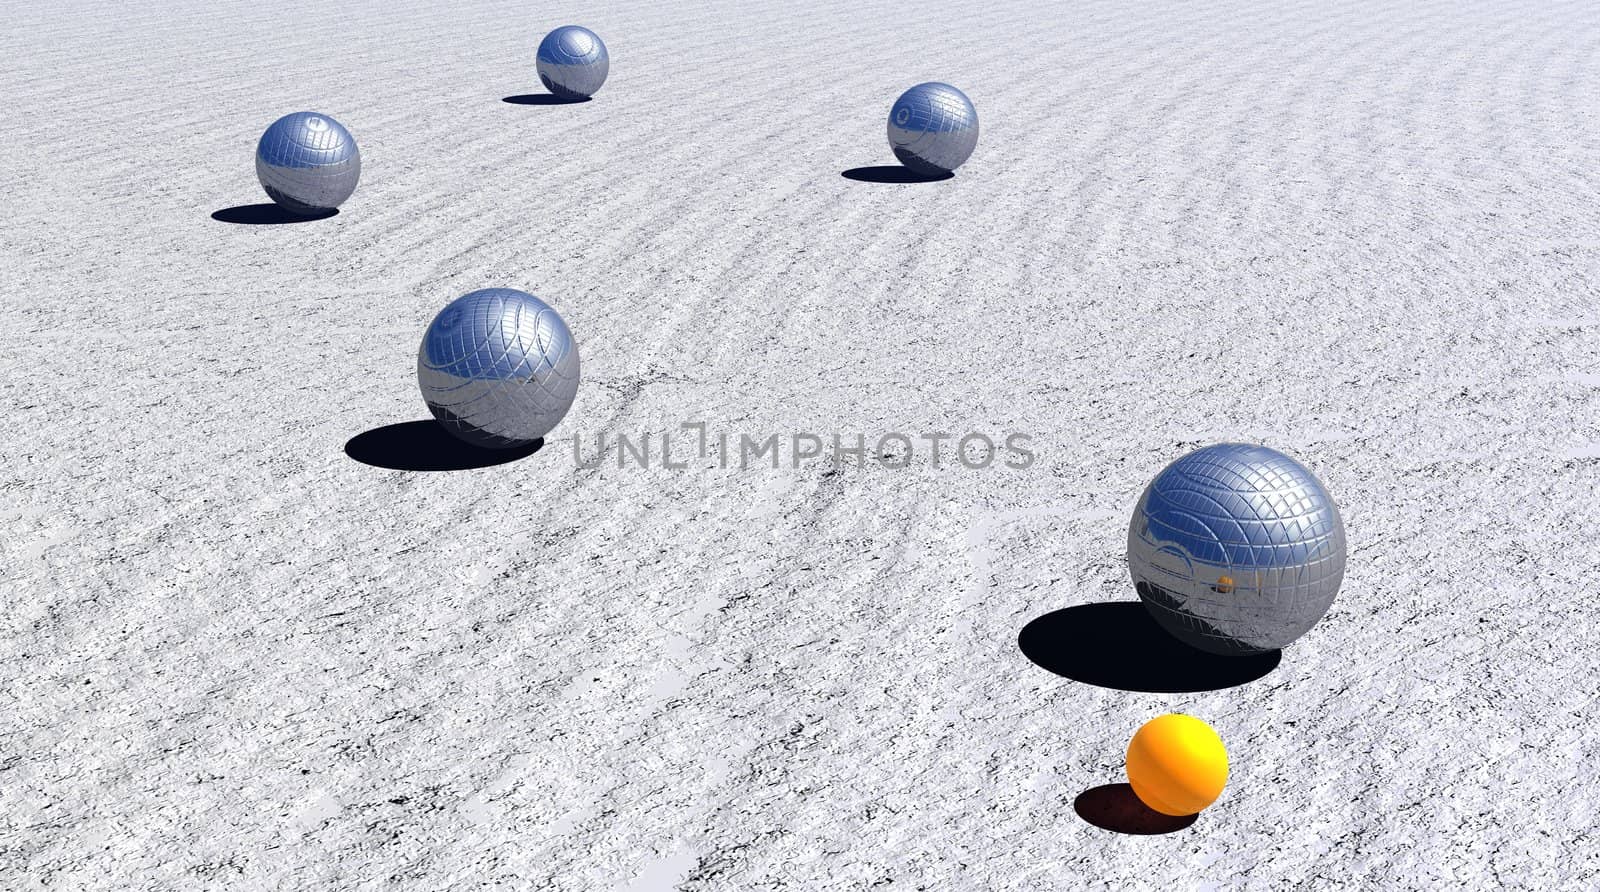 Five metallic petanque balls and the small yellow jack on the ground by day light